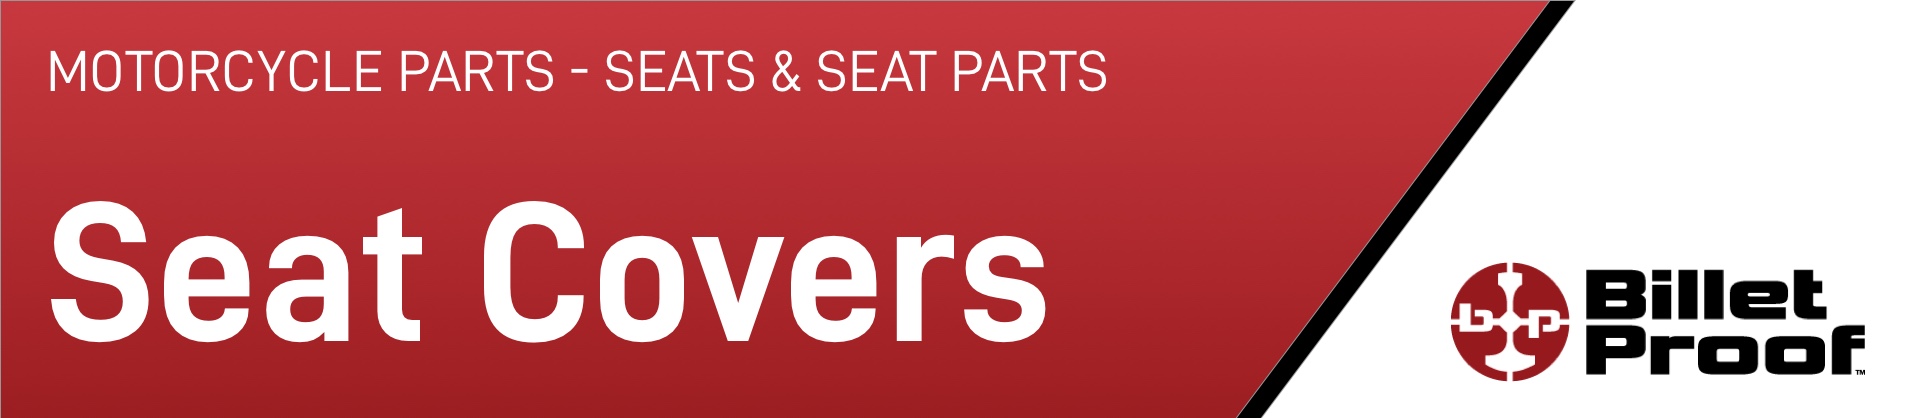 motorcycle-parts-seats-seat-parts-covers.jpg